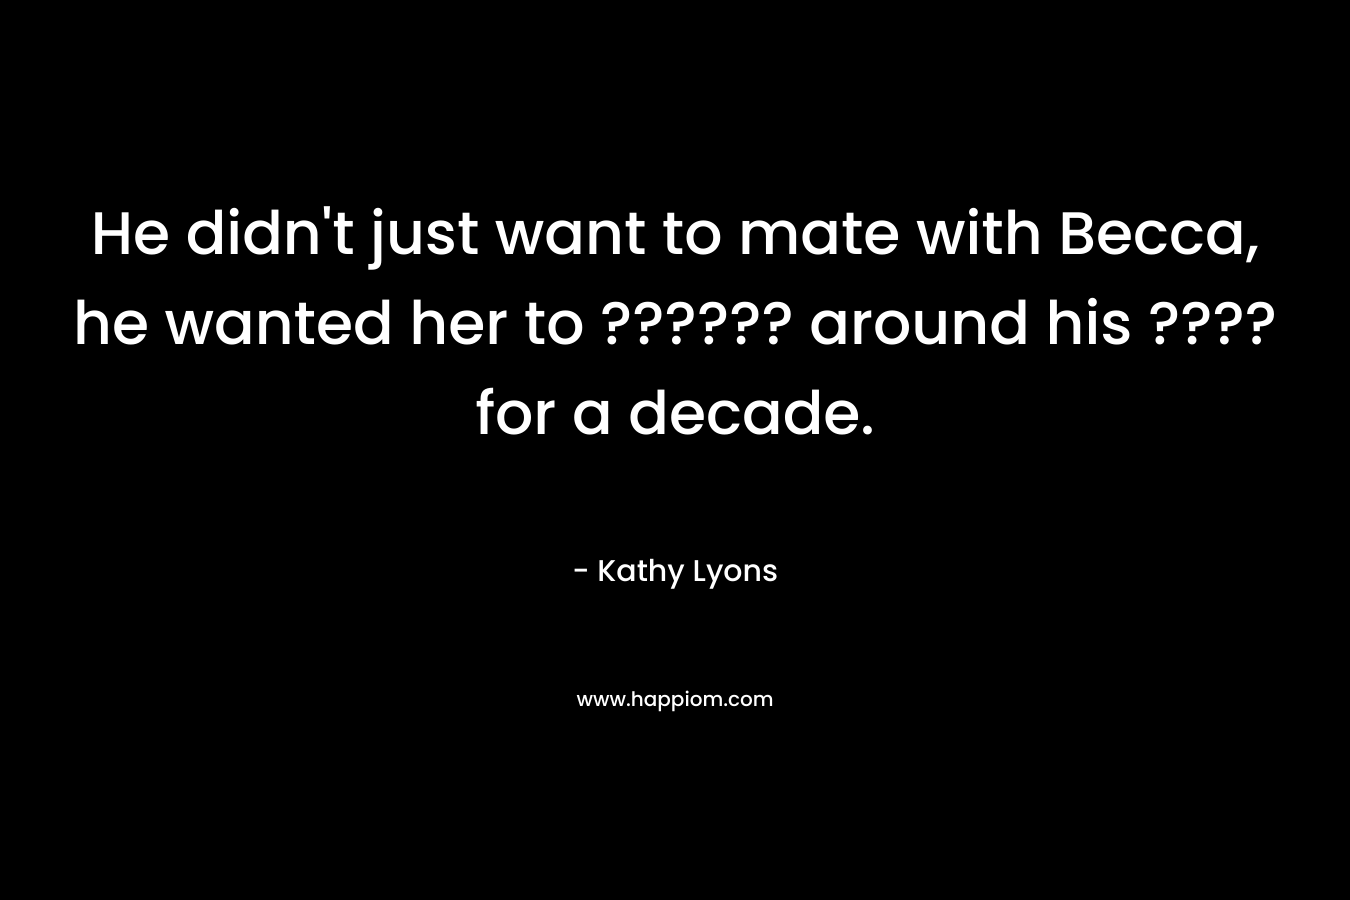 He didn’t just want to mate with Becca, he wanted her to ?????? around his ???? for a decade. – Kathy Lyons